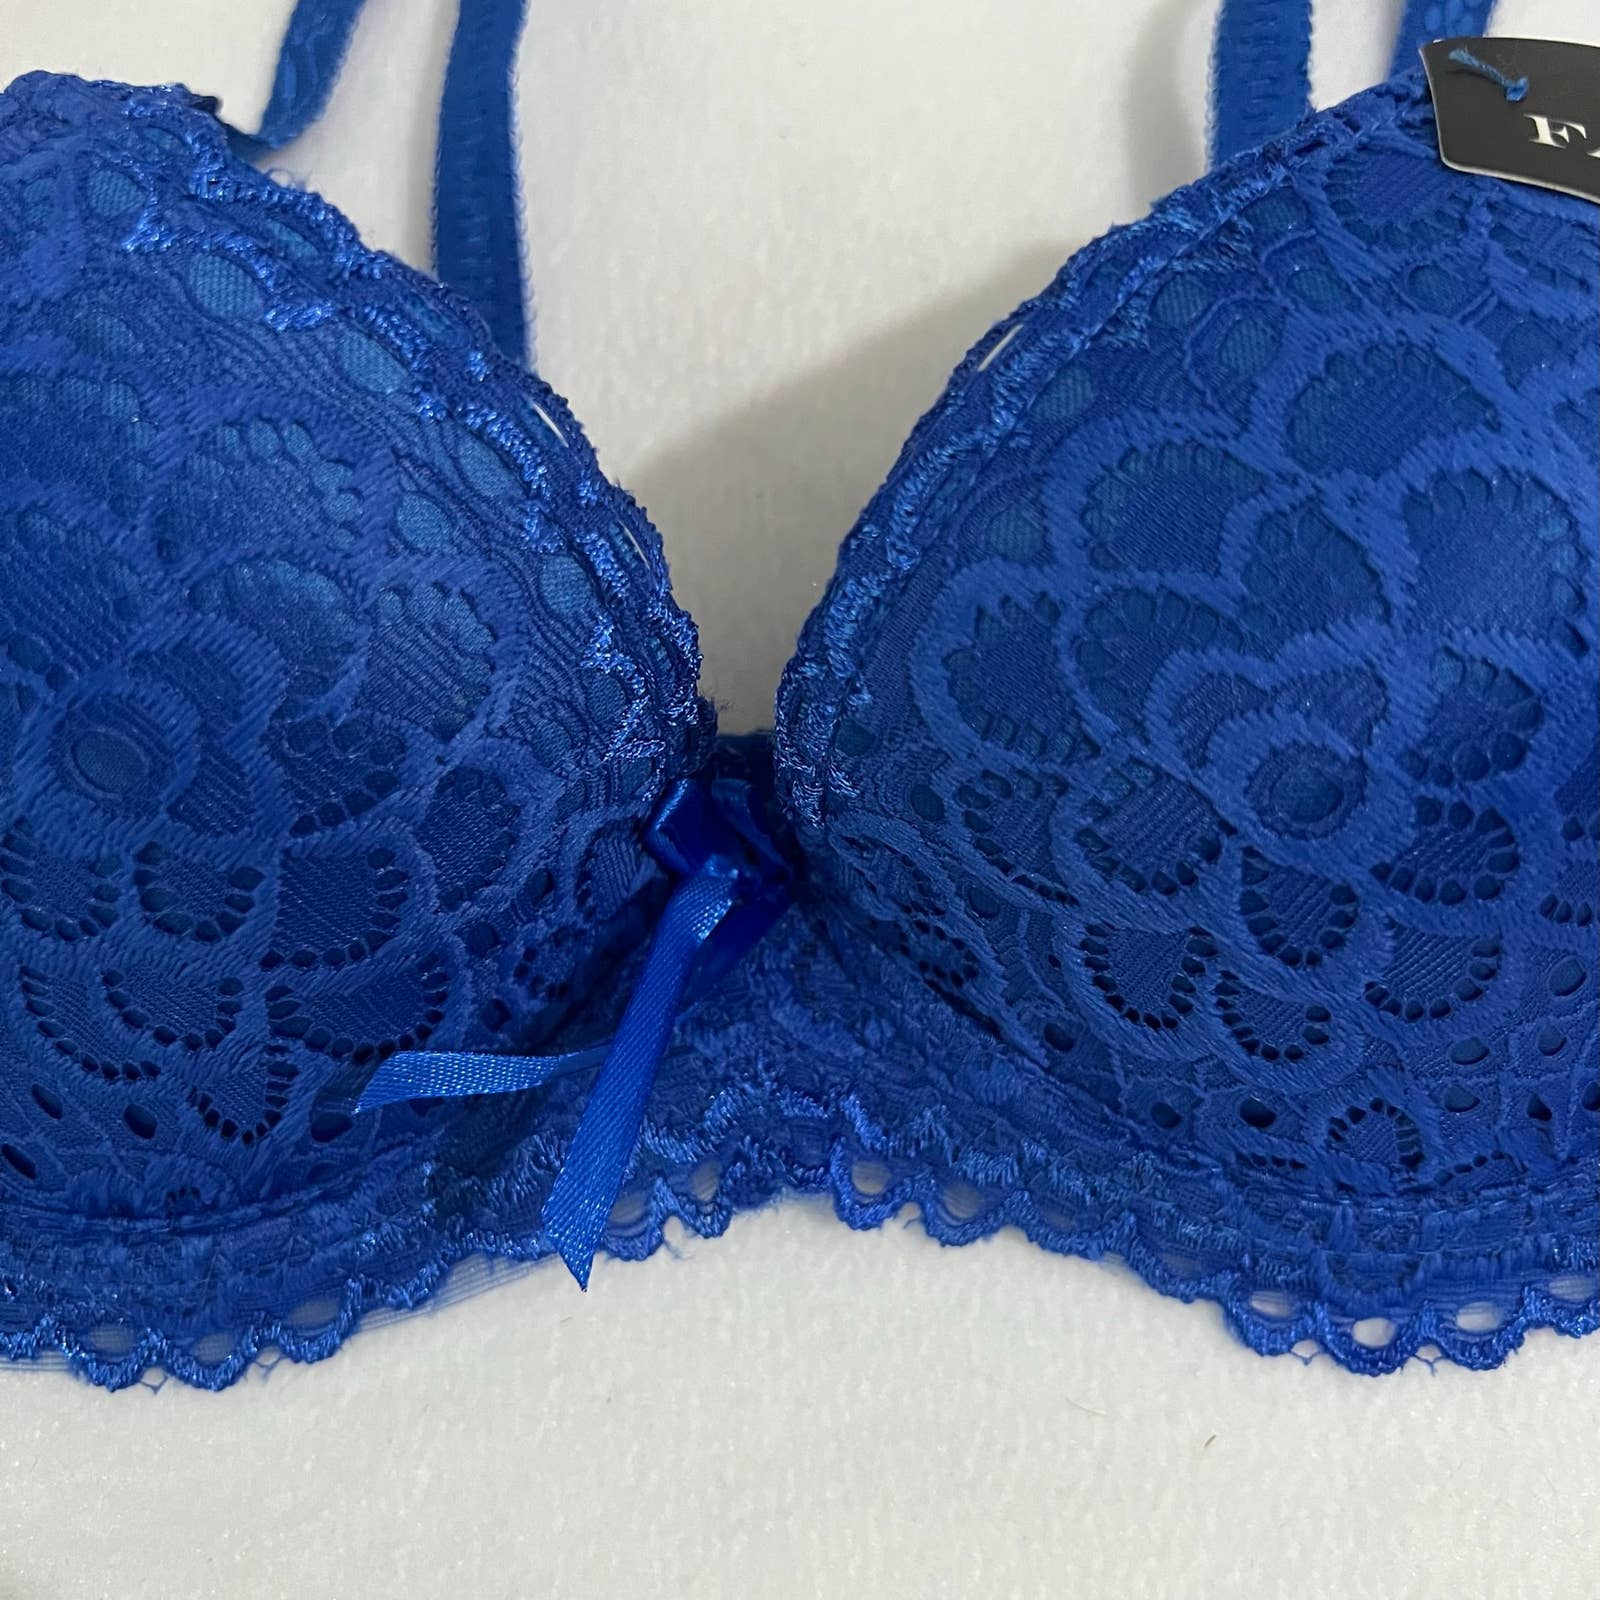 Shyle 40B Royal Blue Push Up Bra in Salem - Dealers, Manufacturers &  Suppliers - Justdial